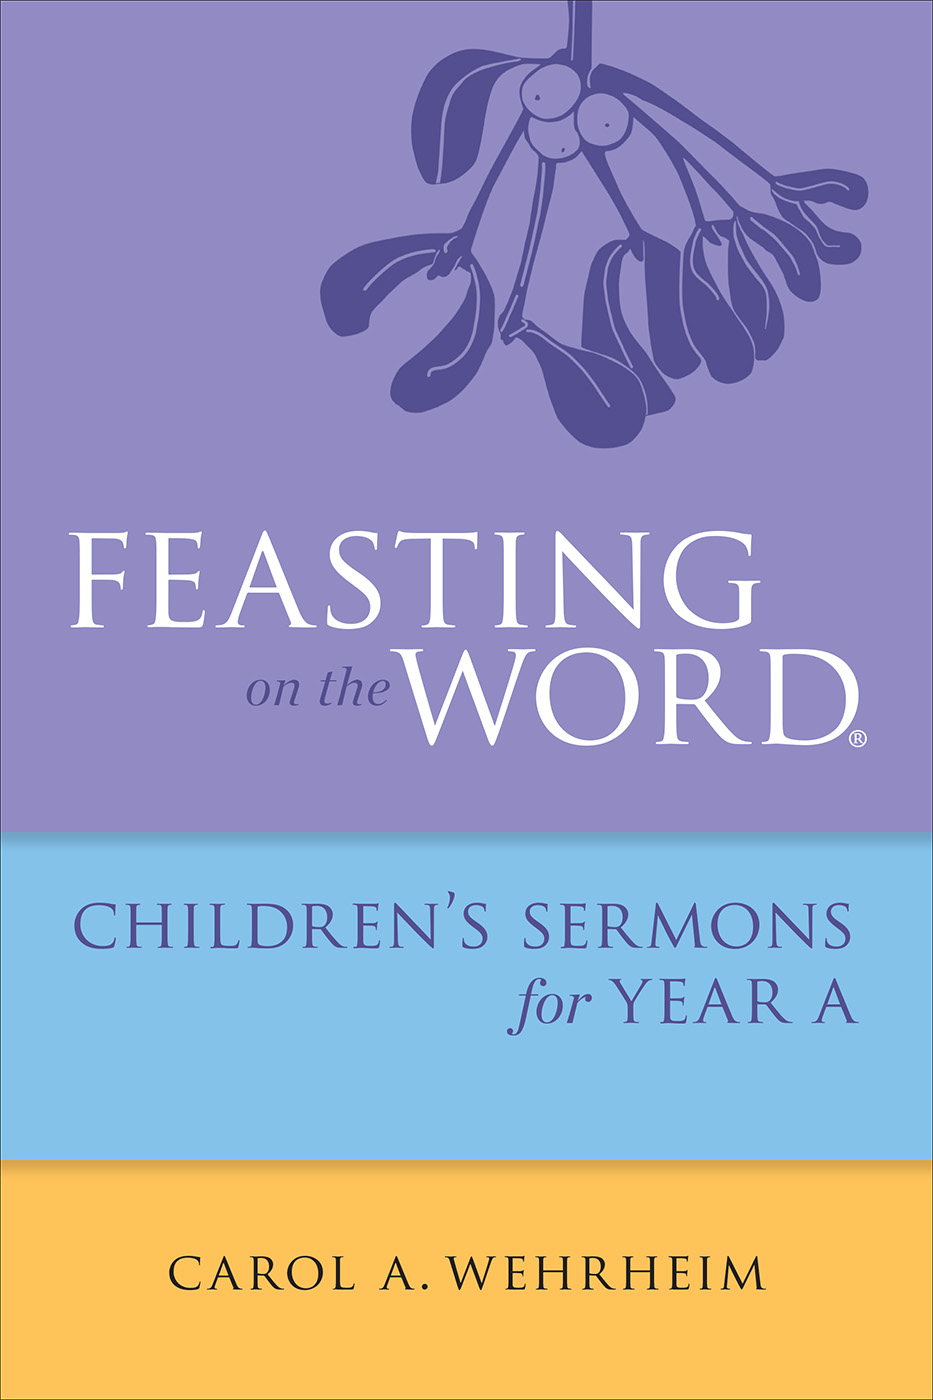 Feasting on the Word Children's Sermons for Year A